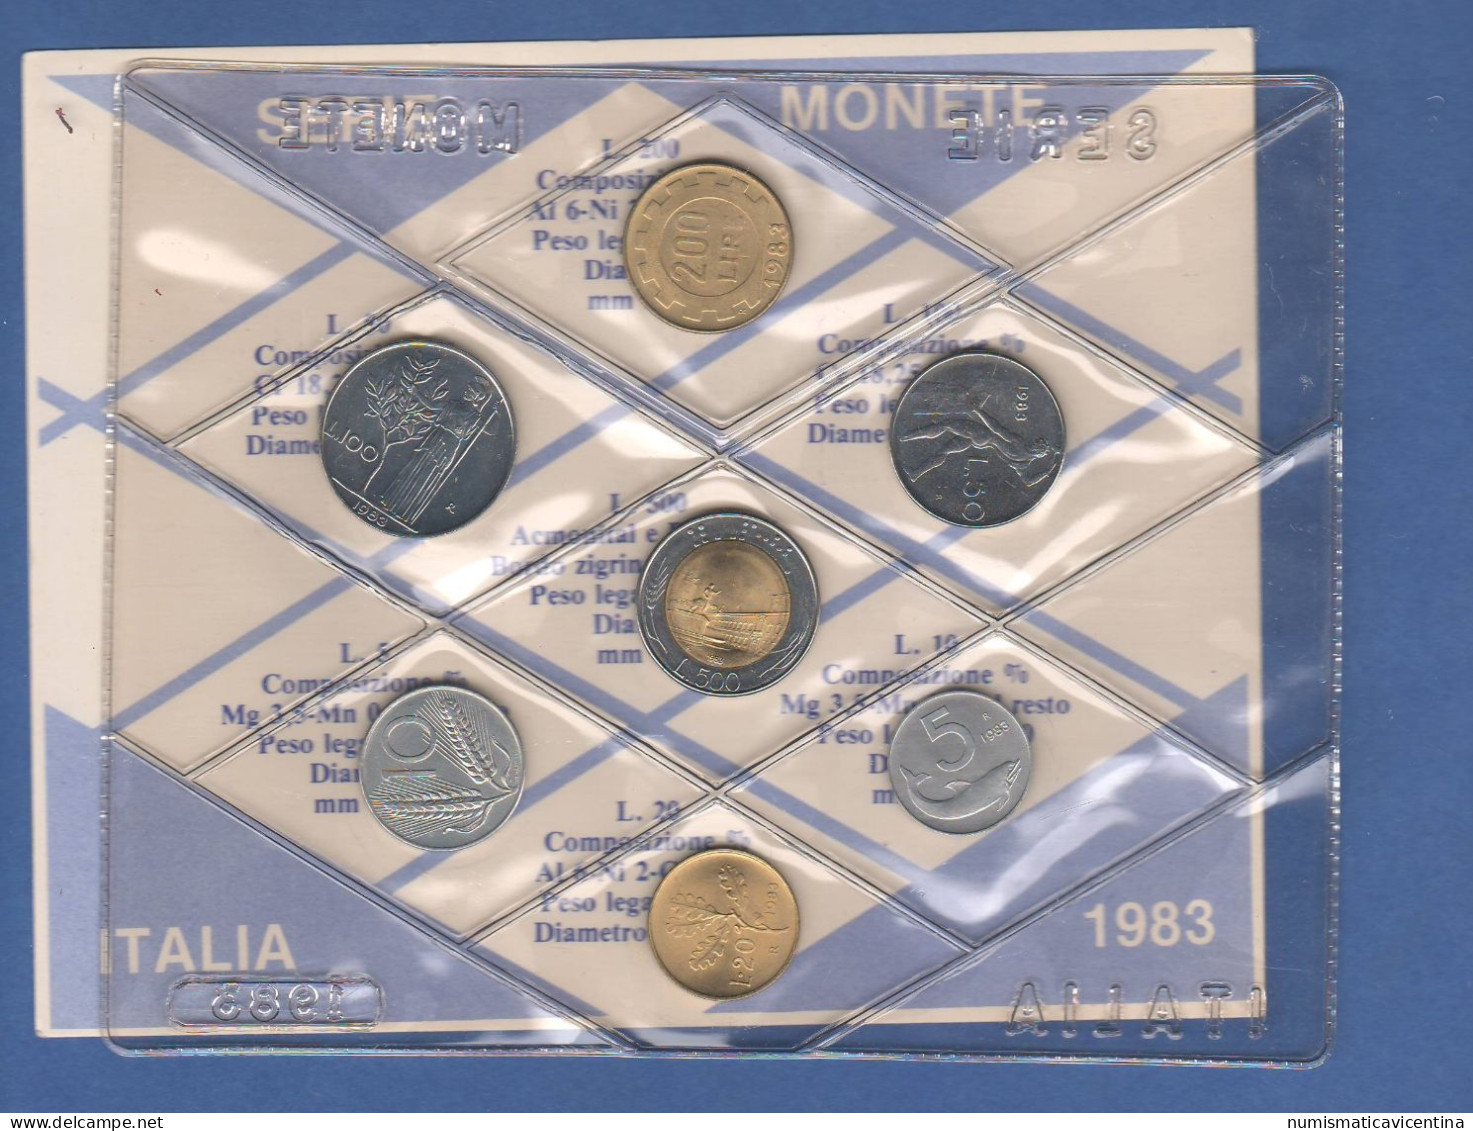 ITALIA 1983 Serie 7 Monete 5 10 20 50 100 200 500 Lire FDC UNC Italy Coin Set Private Issues Emissioni Private - Mint Sets & Proof Sets